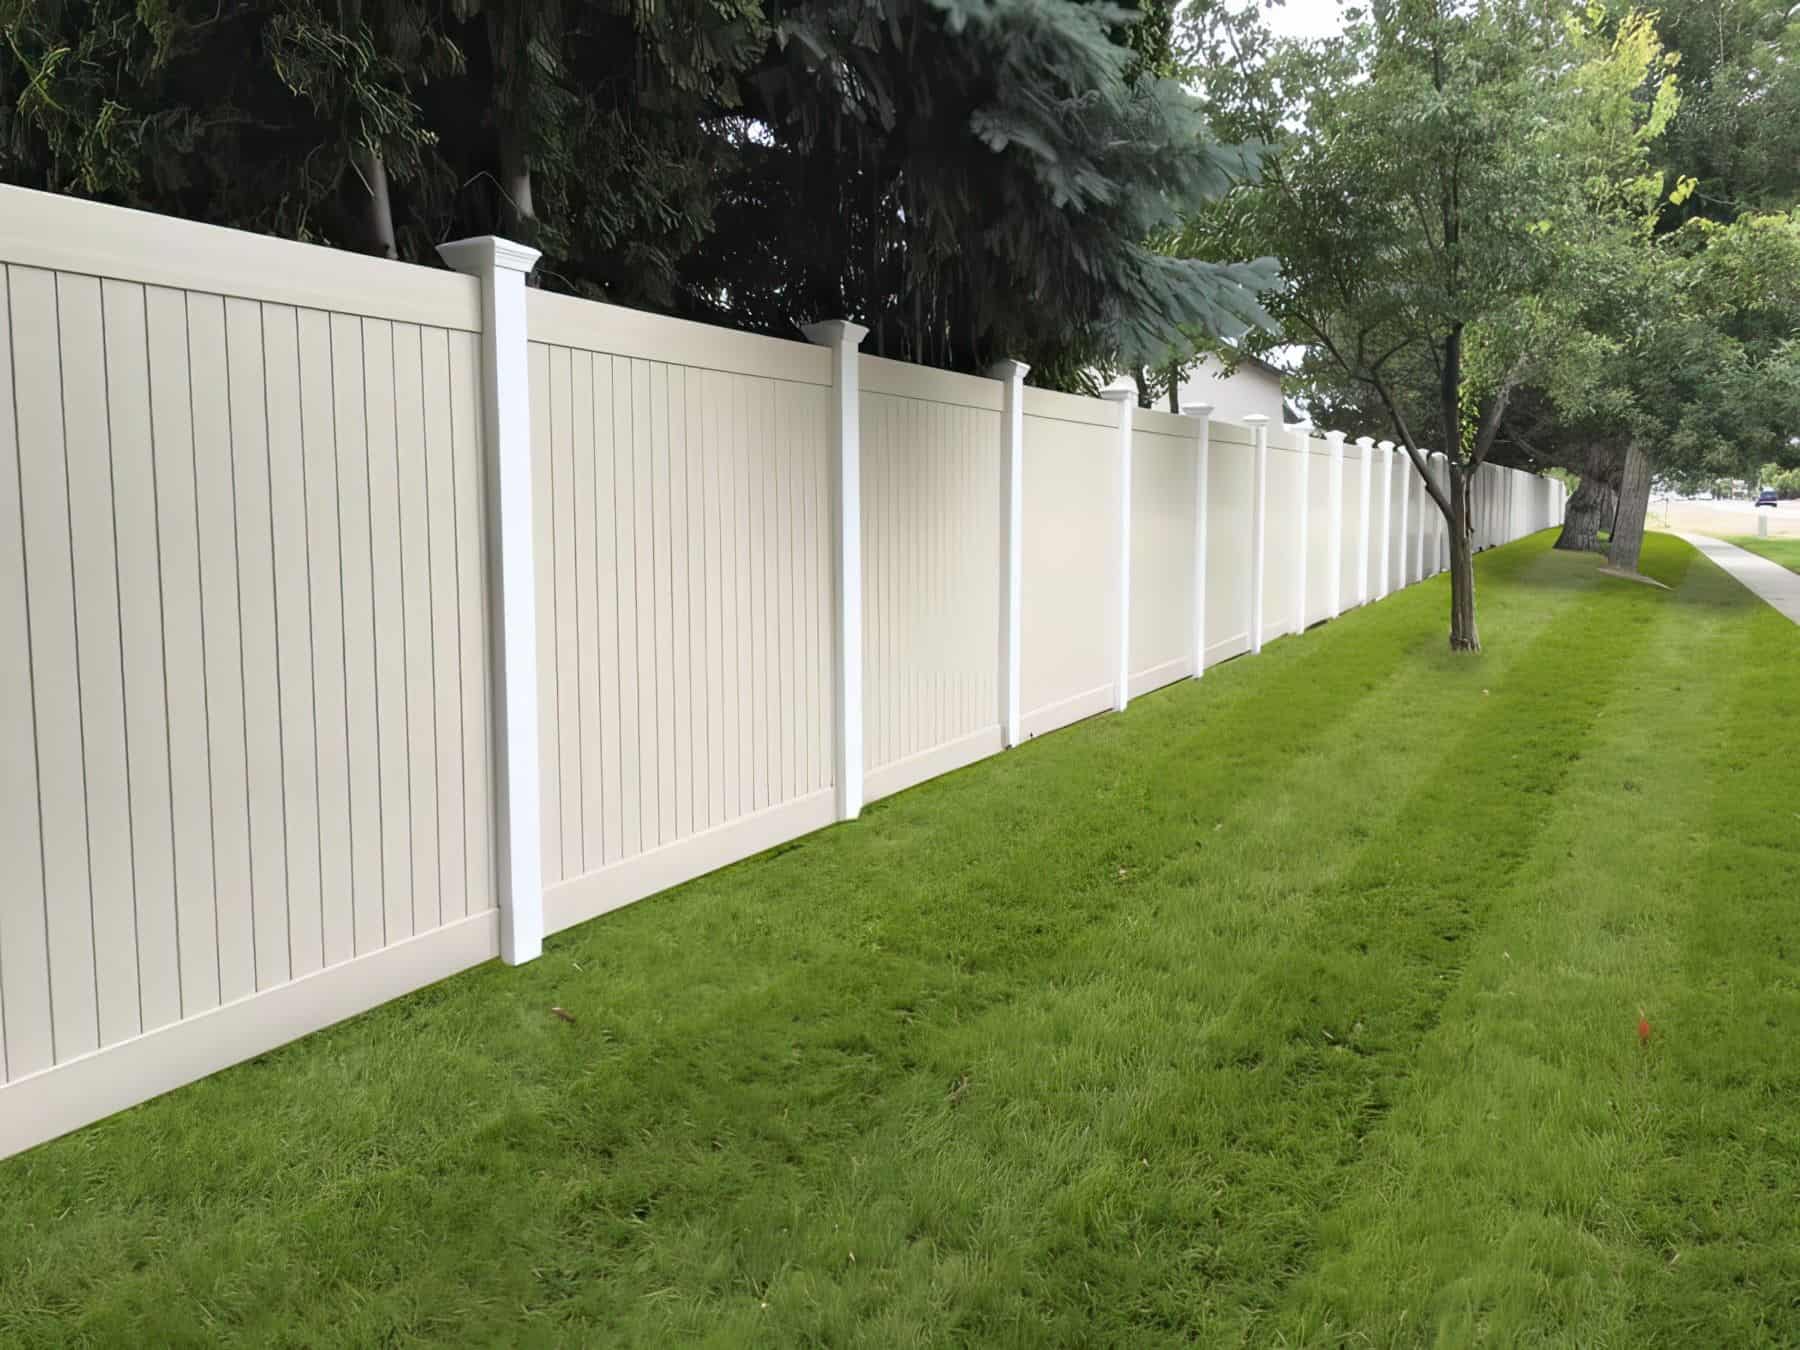 Vinyl privacy vertical fence as a boundary wall surrounded by trees and on top of well trimmed lush lawn.